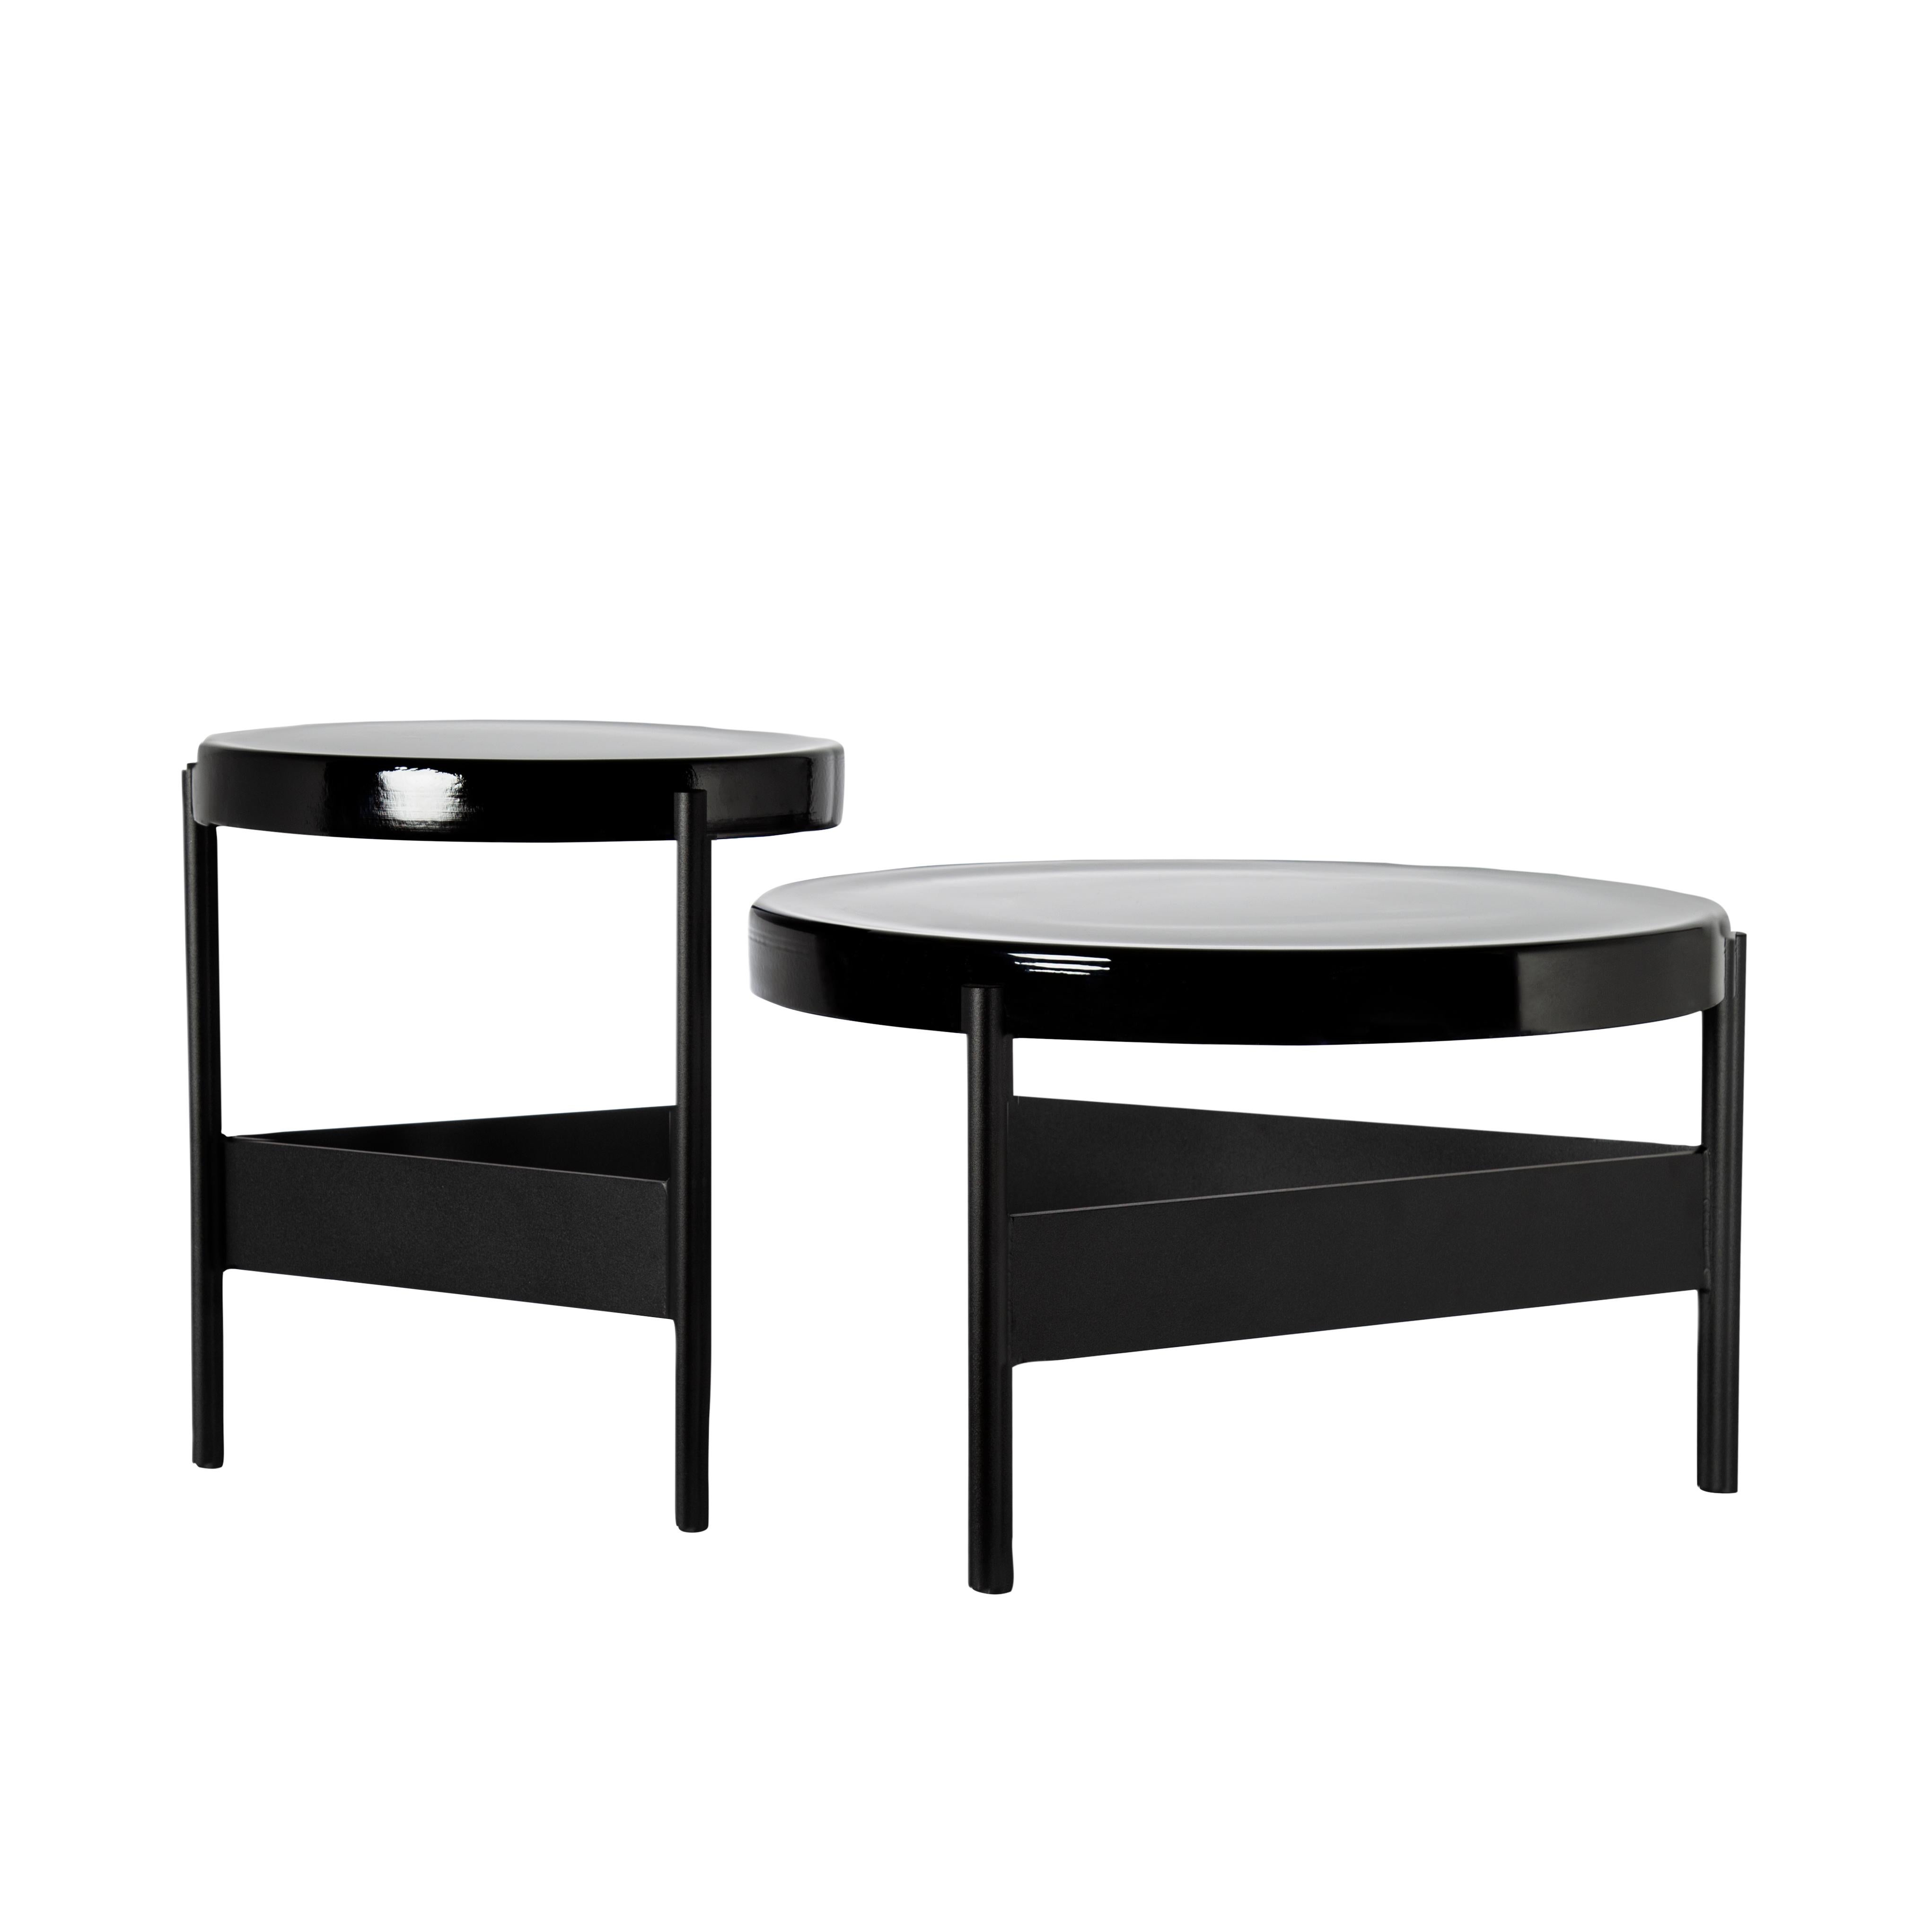 Post-Modern Alwa Two Big White Black Coffee Table by Pulpo